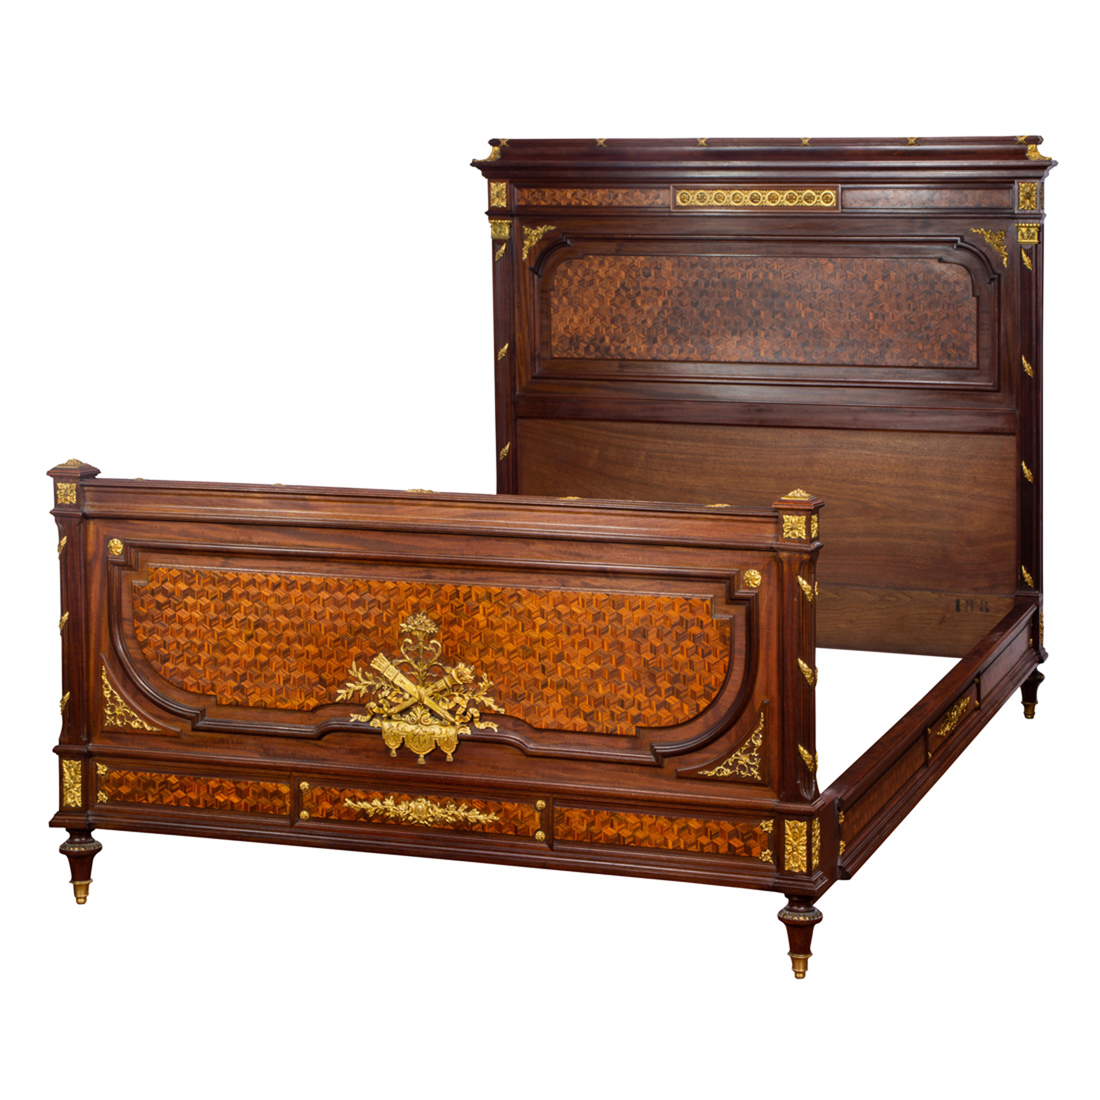 A FRENCH LOUIS XVI STYLE MARQUETRY 3a39f8